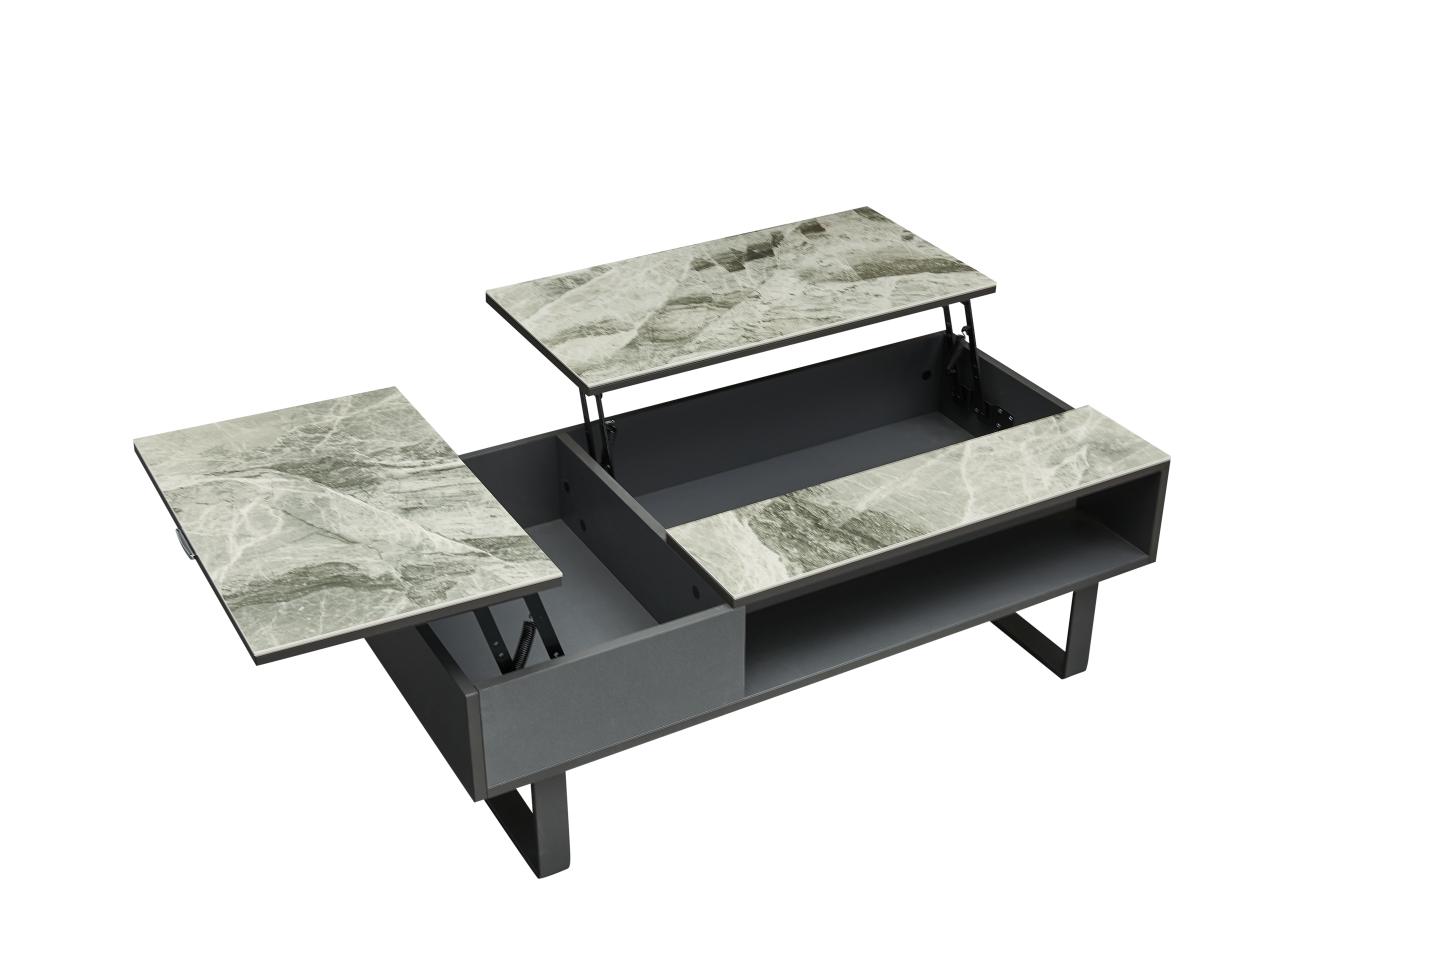 Stanley Grey Marble Coffee Table w/ Storage Made in Italy Contemporary –  buy online on NY Furniture Outlet